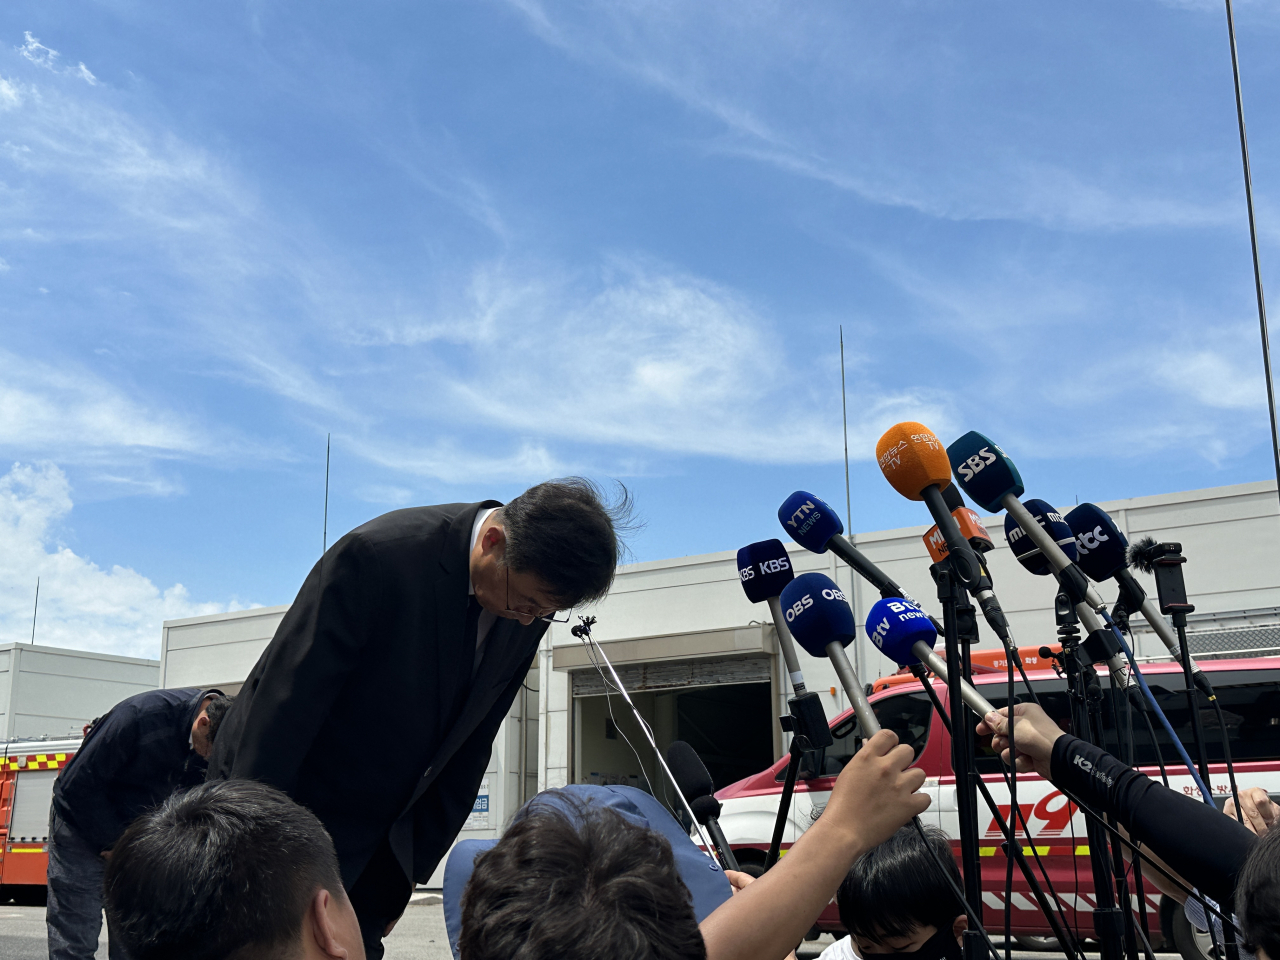 Park Soon-kwan, CEO of Aricell, bows before offering condolences to the workers who were killed and apologizing to those affected during a press briefing on Tuesday. (Lee Jung-joo/The Korea Herald)